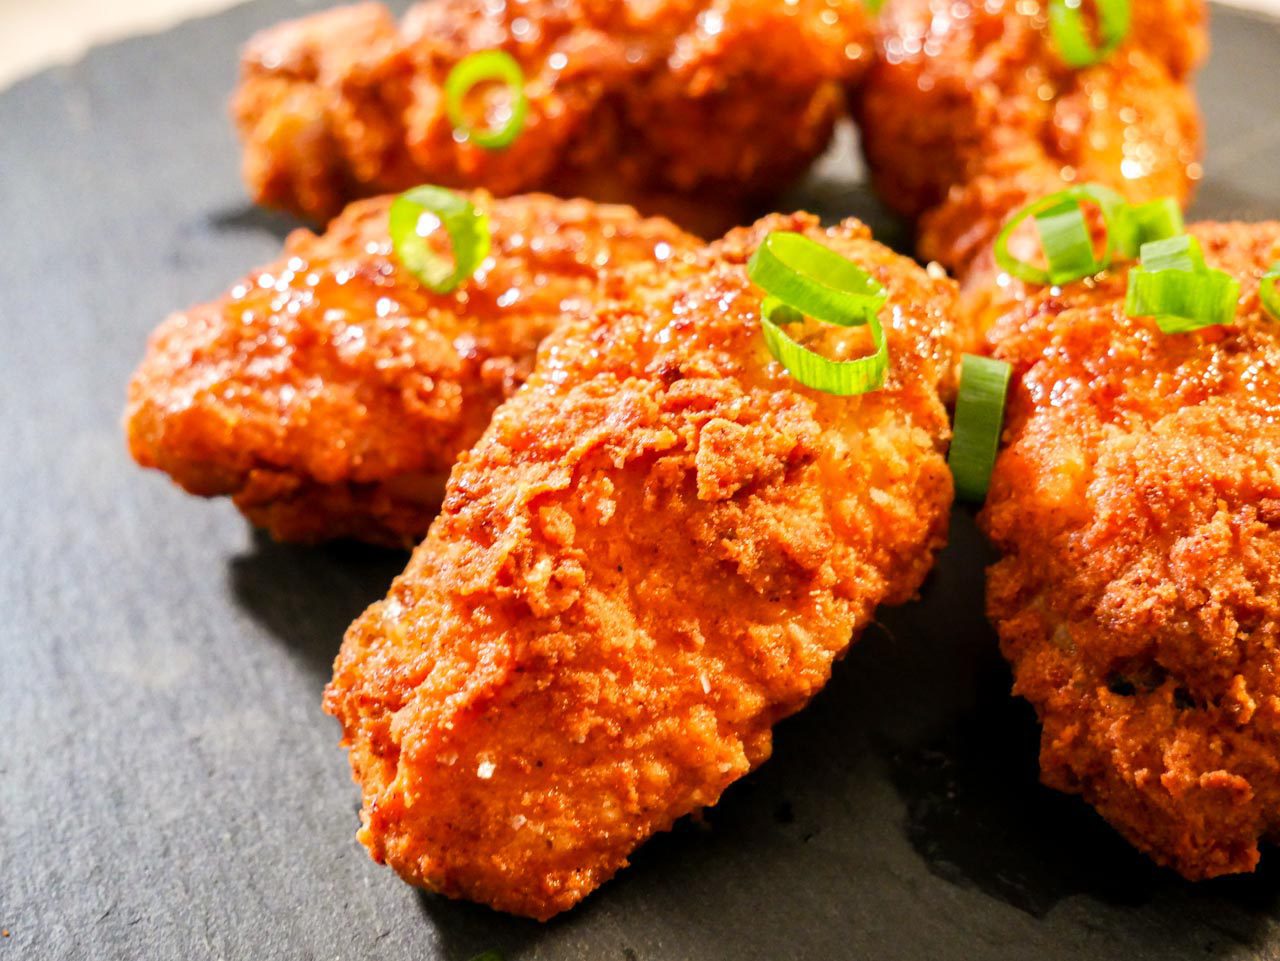 Plain, gluten-free fried chicken wings made with our tiger nut all purpose flour.